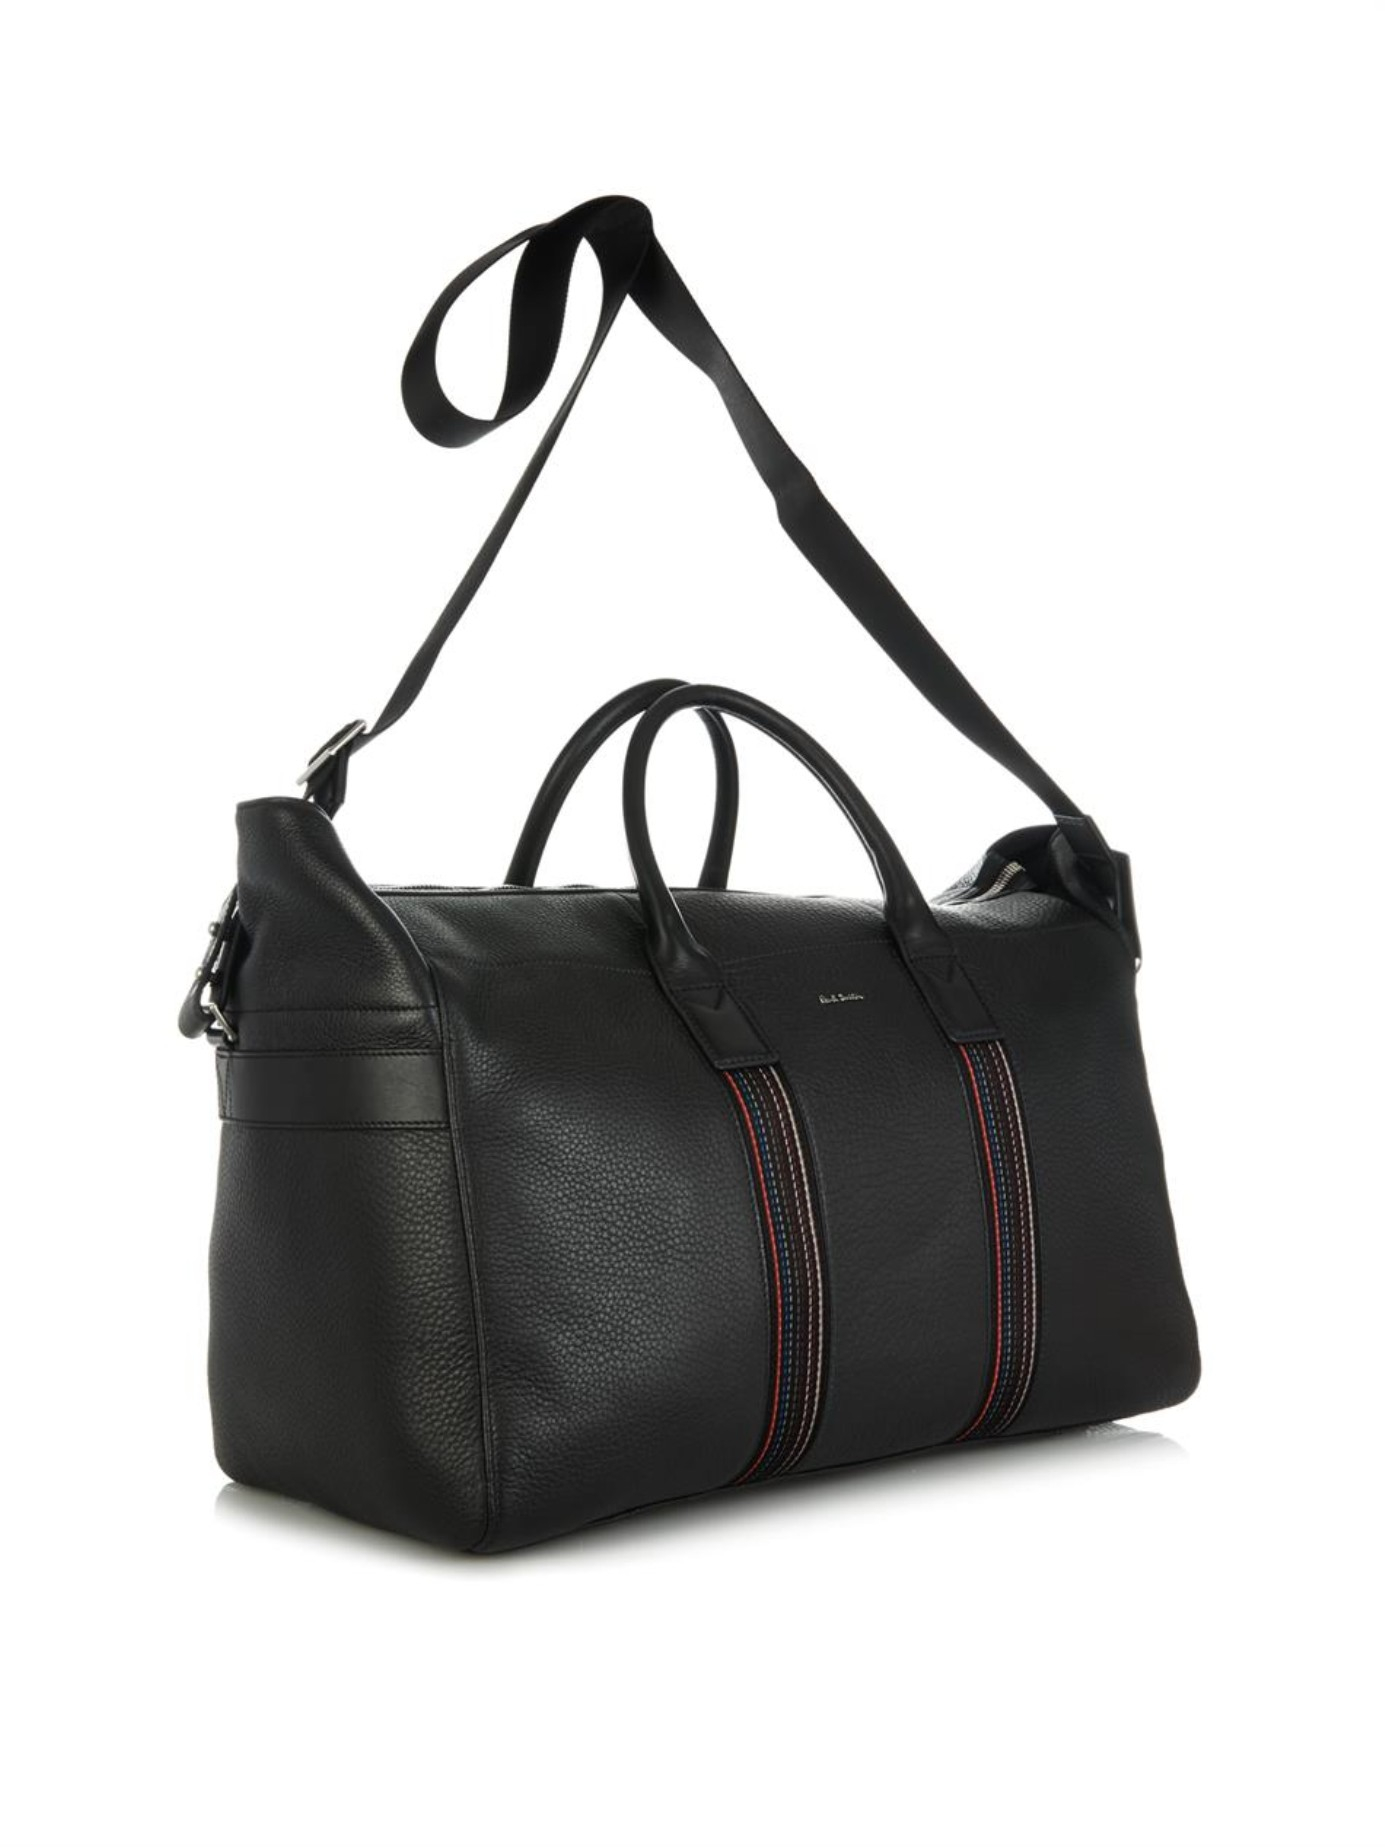 Paul Smith City Webbing Leather Weekend Bag in Black for Men - Lyst